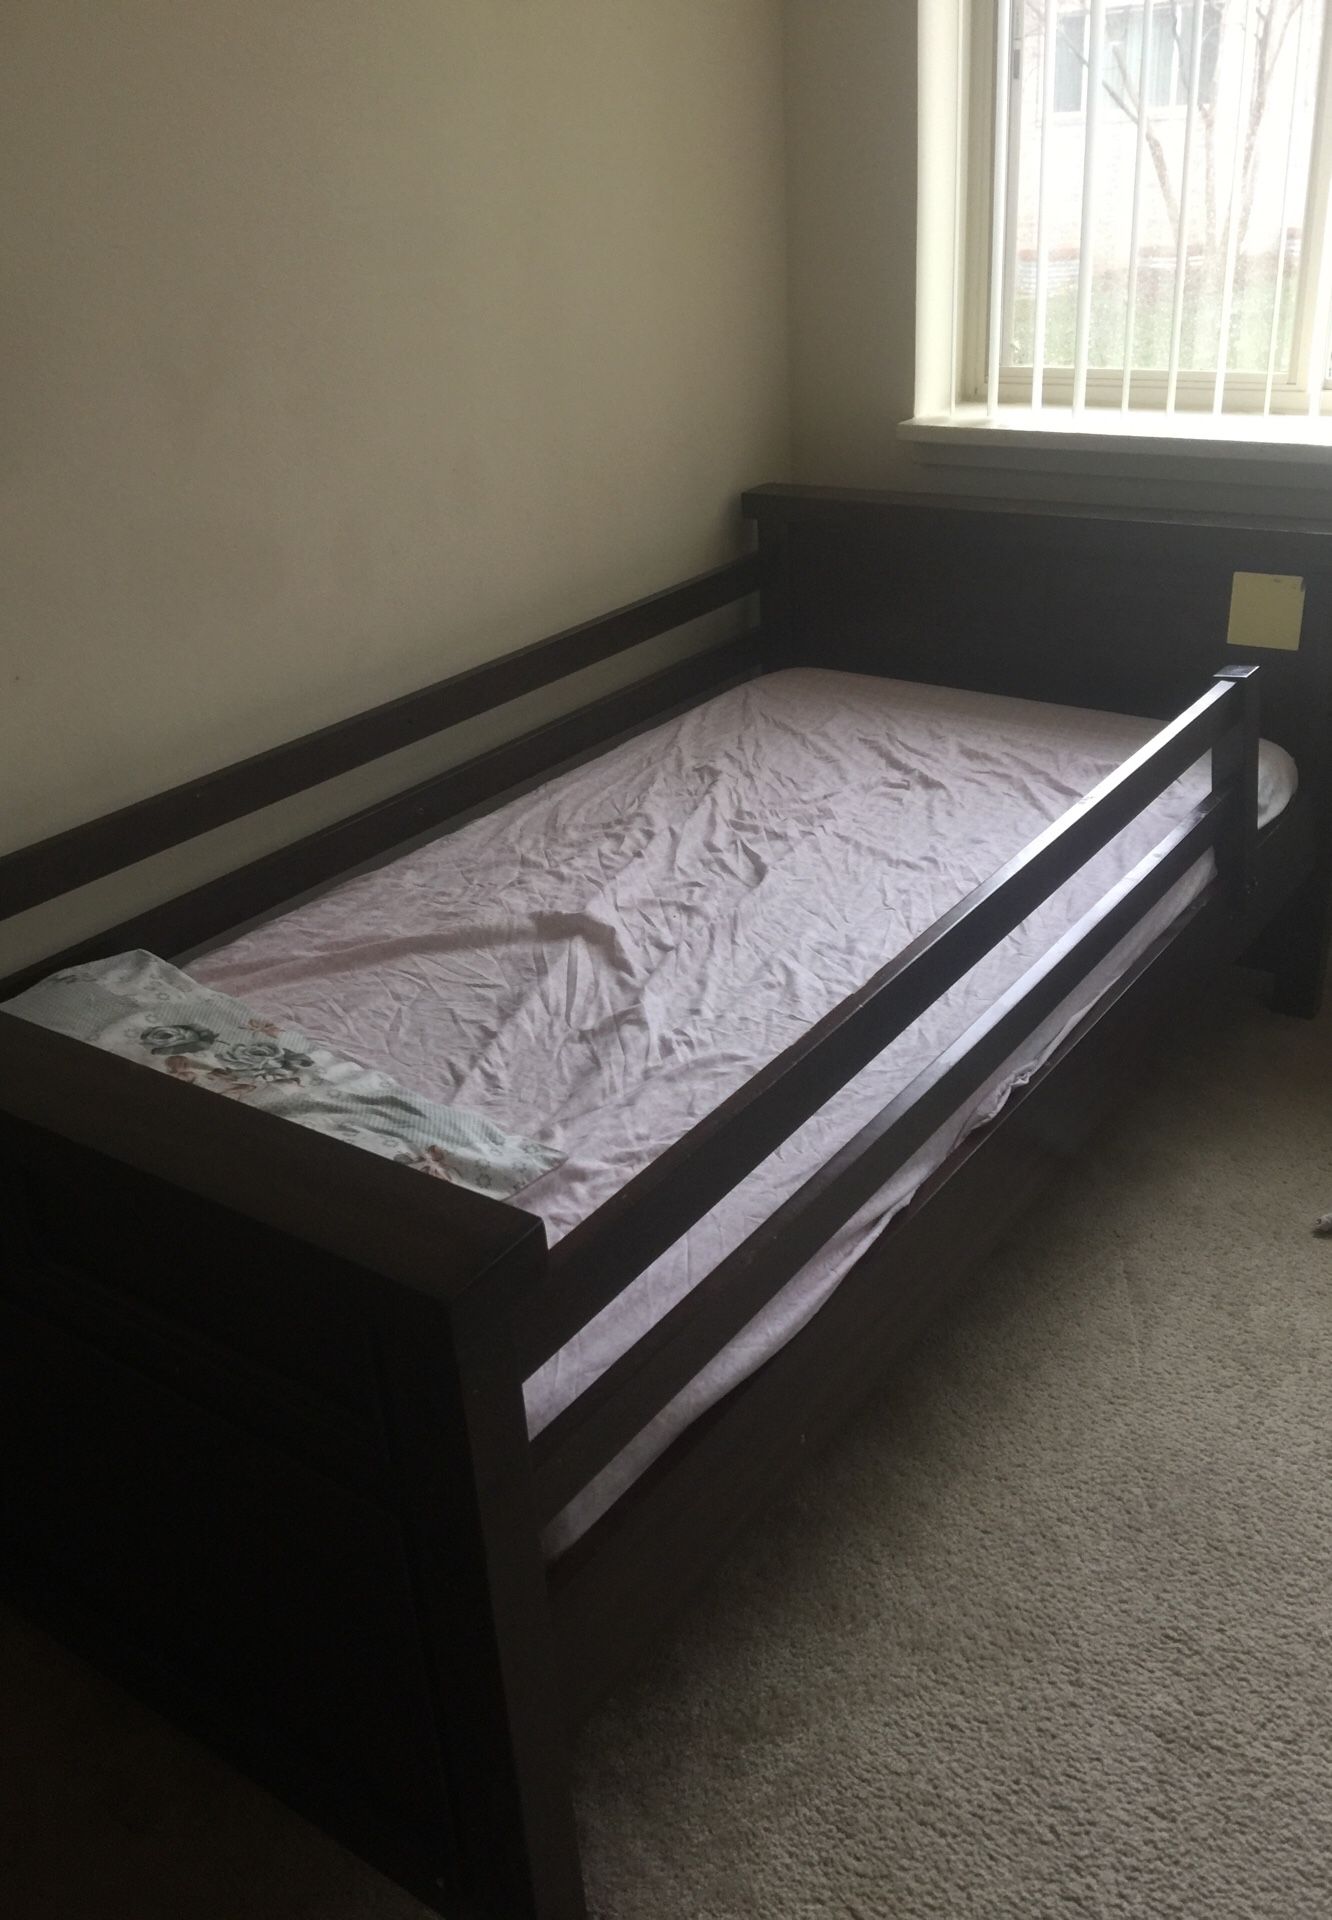 twin bed for sale serious buyers 500 used for months